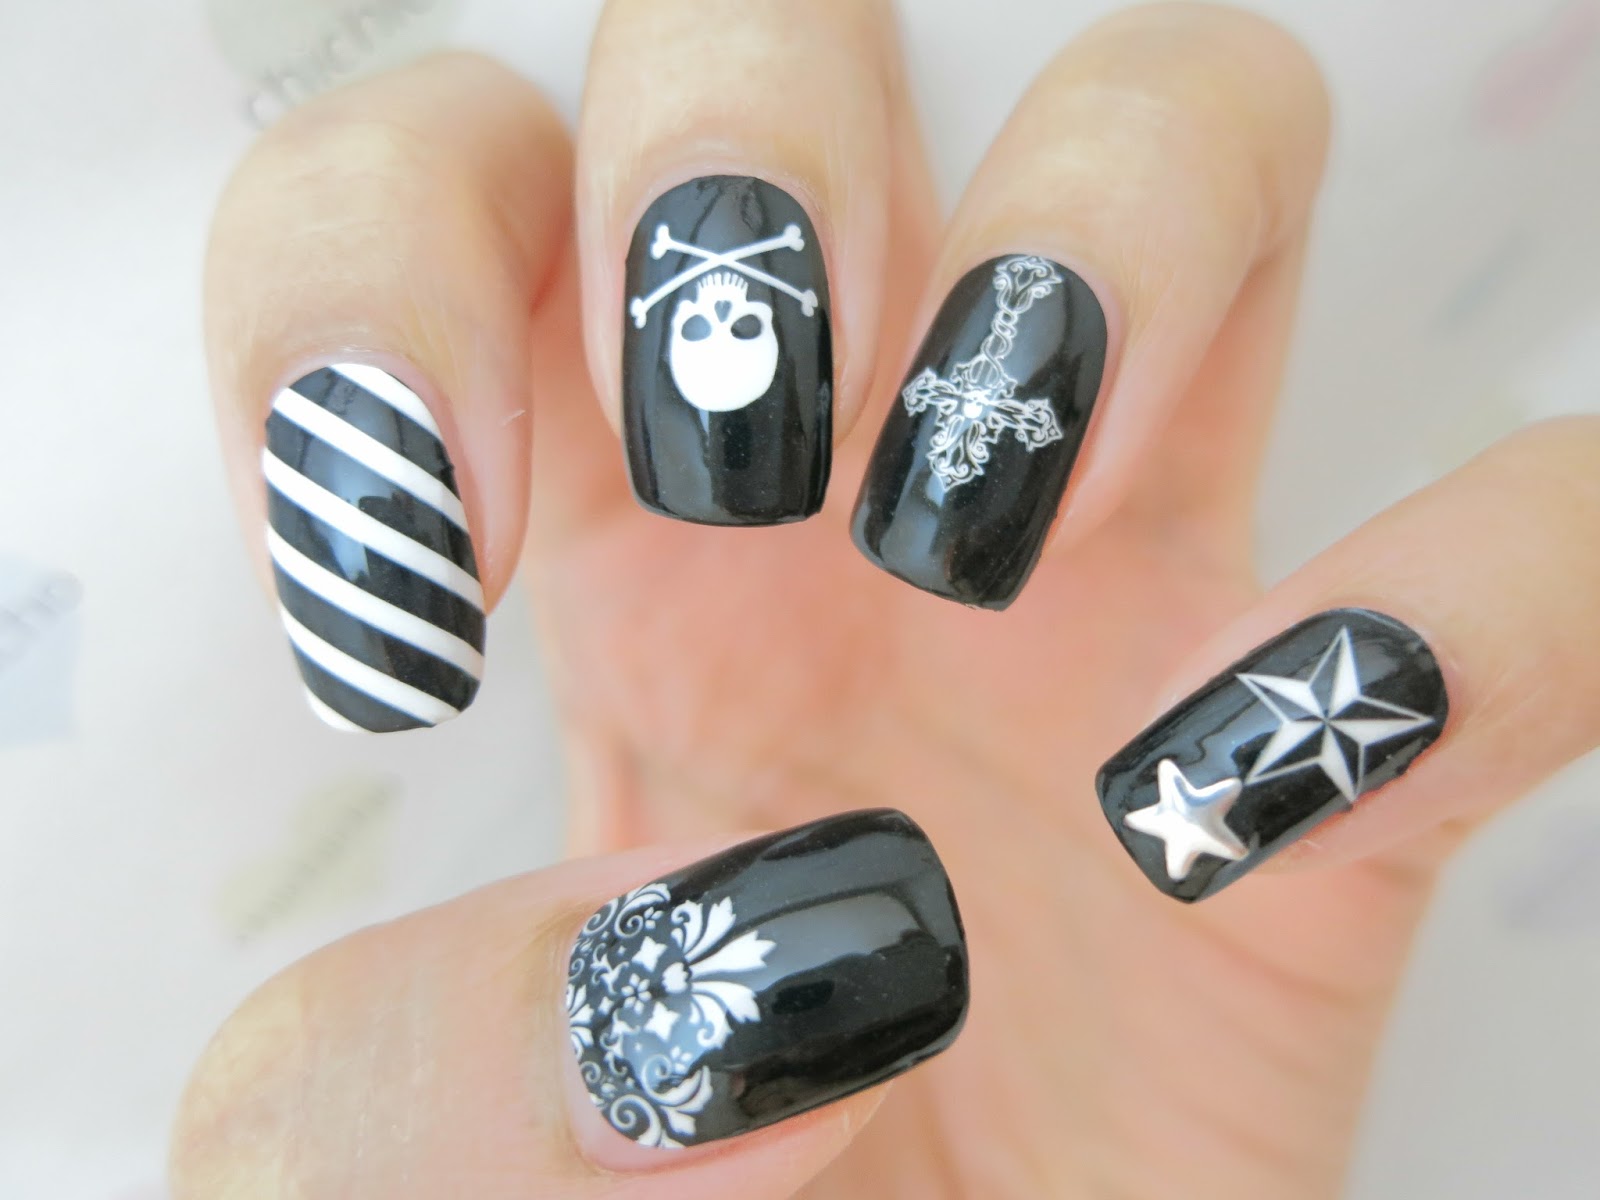 3. "Edgy Nail Designs" - wide 7